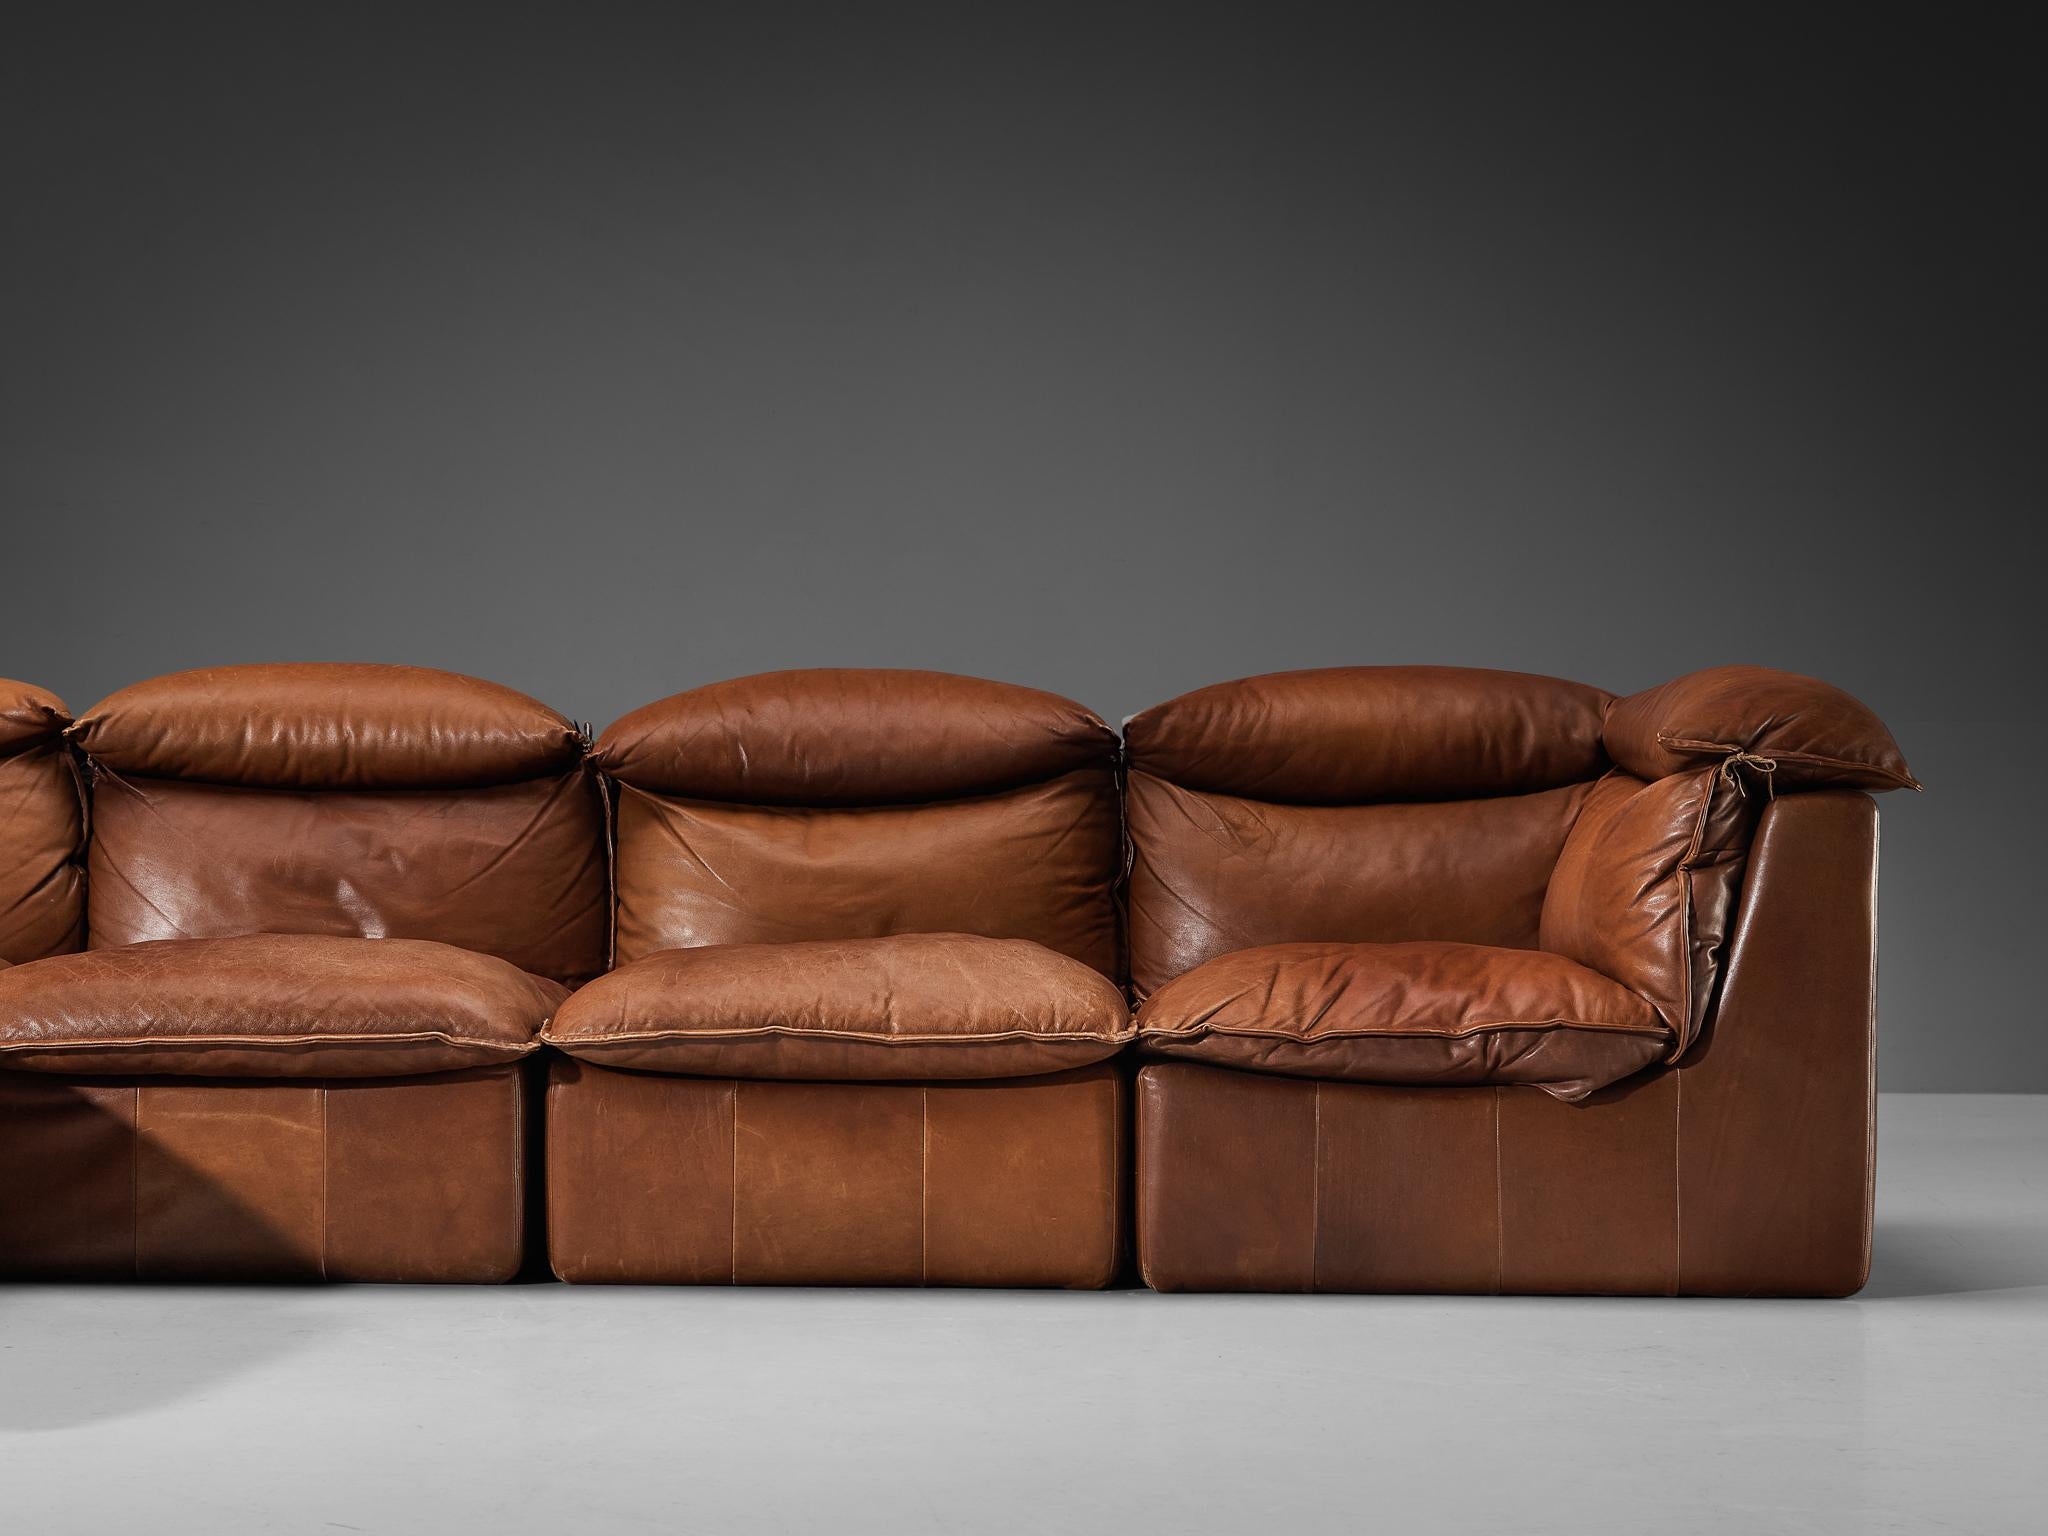 European Sectional Sofa in Cognac Leather